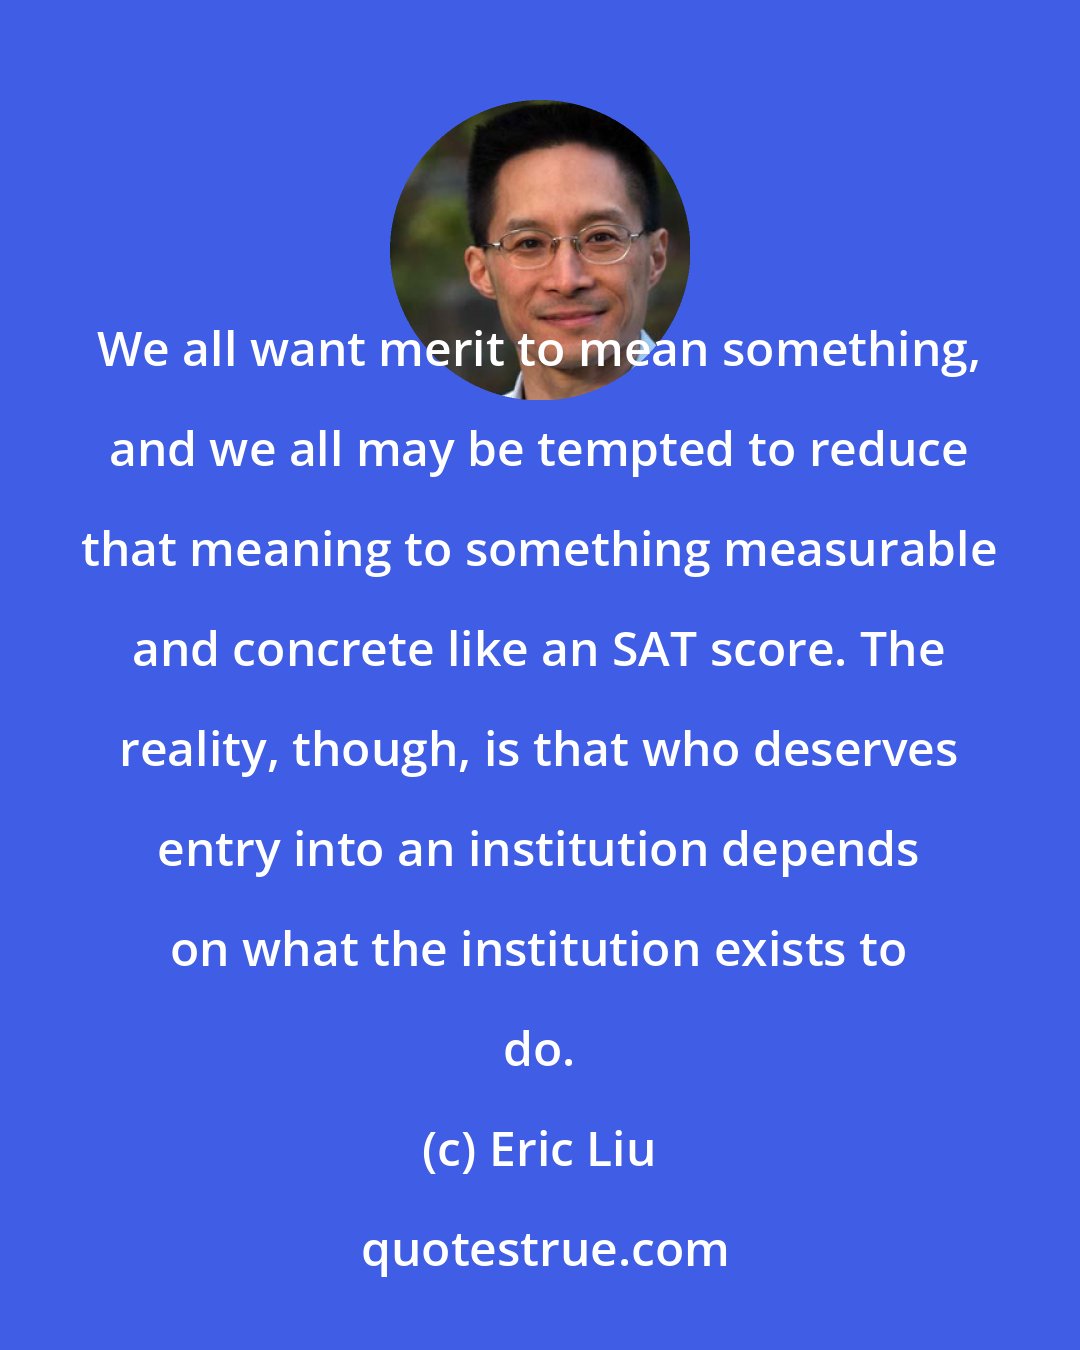 Eric Liu: We all want merit to mean something, and we all may be tempted to reduce that meaning to something measurable and concrete like an SAT score. The reality, though, is that who deserves entry into an institution depends on what the institution exists to do.